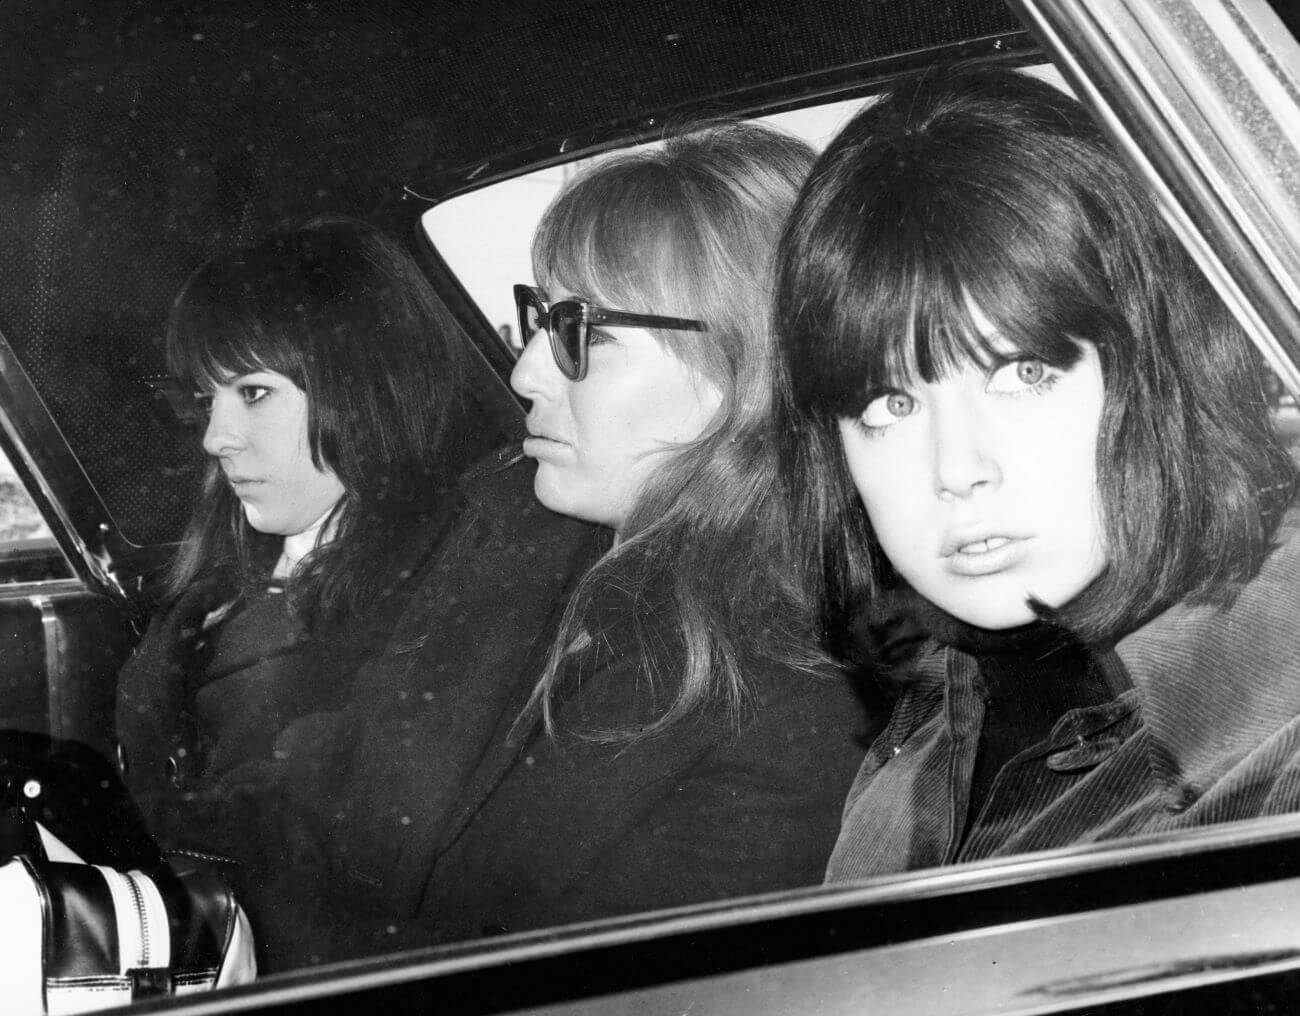 A black and white picture of Maureen Starkey, Cynthia Lennon, and Pattie Boyd, who would become ex-wives of The Beatles, in the back of a car.